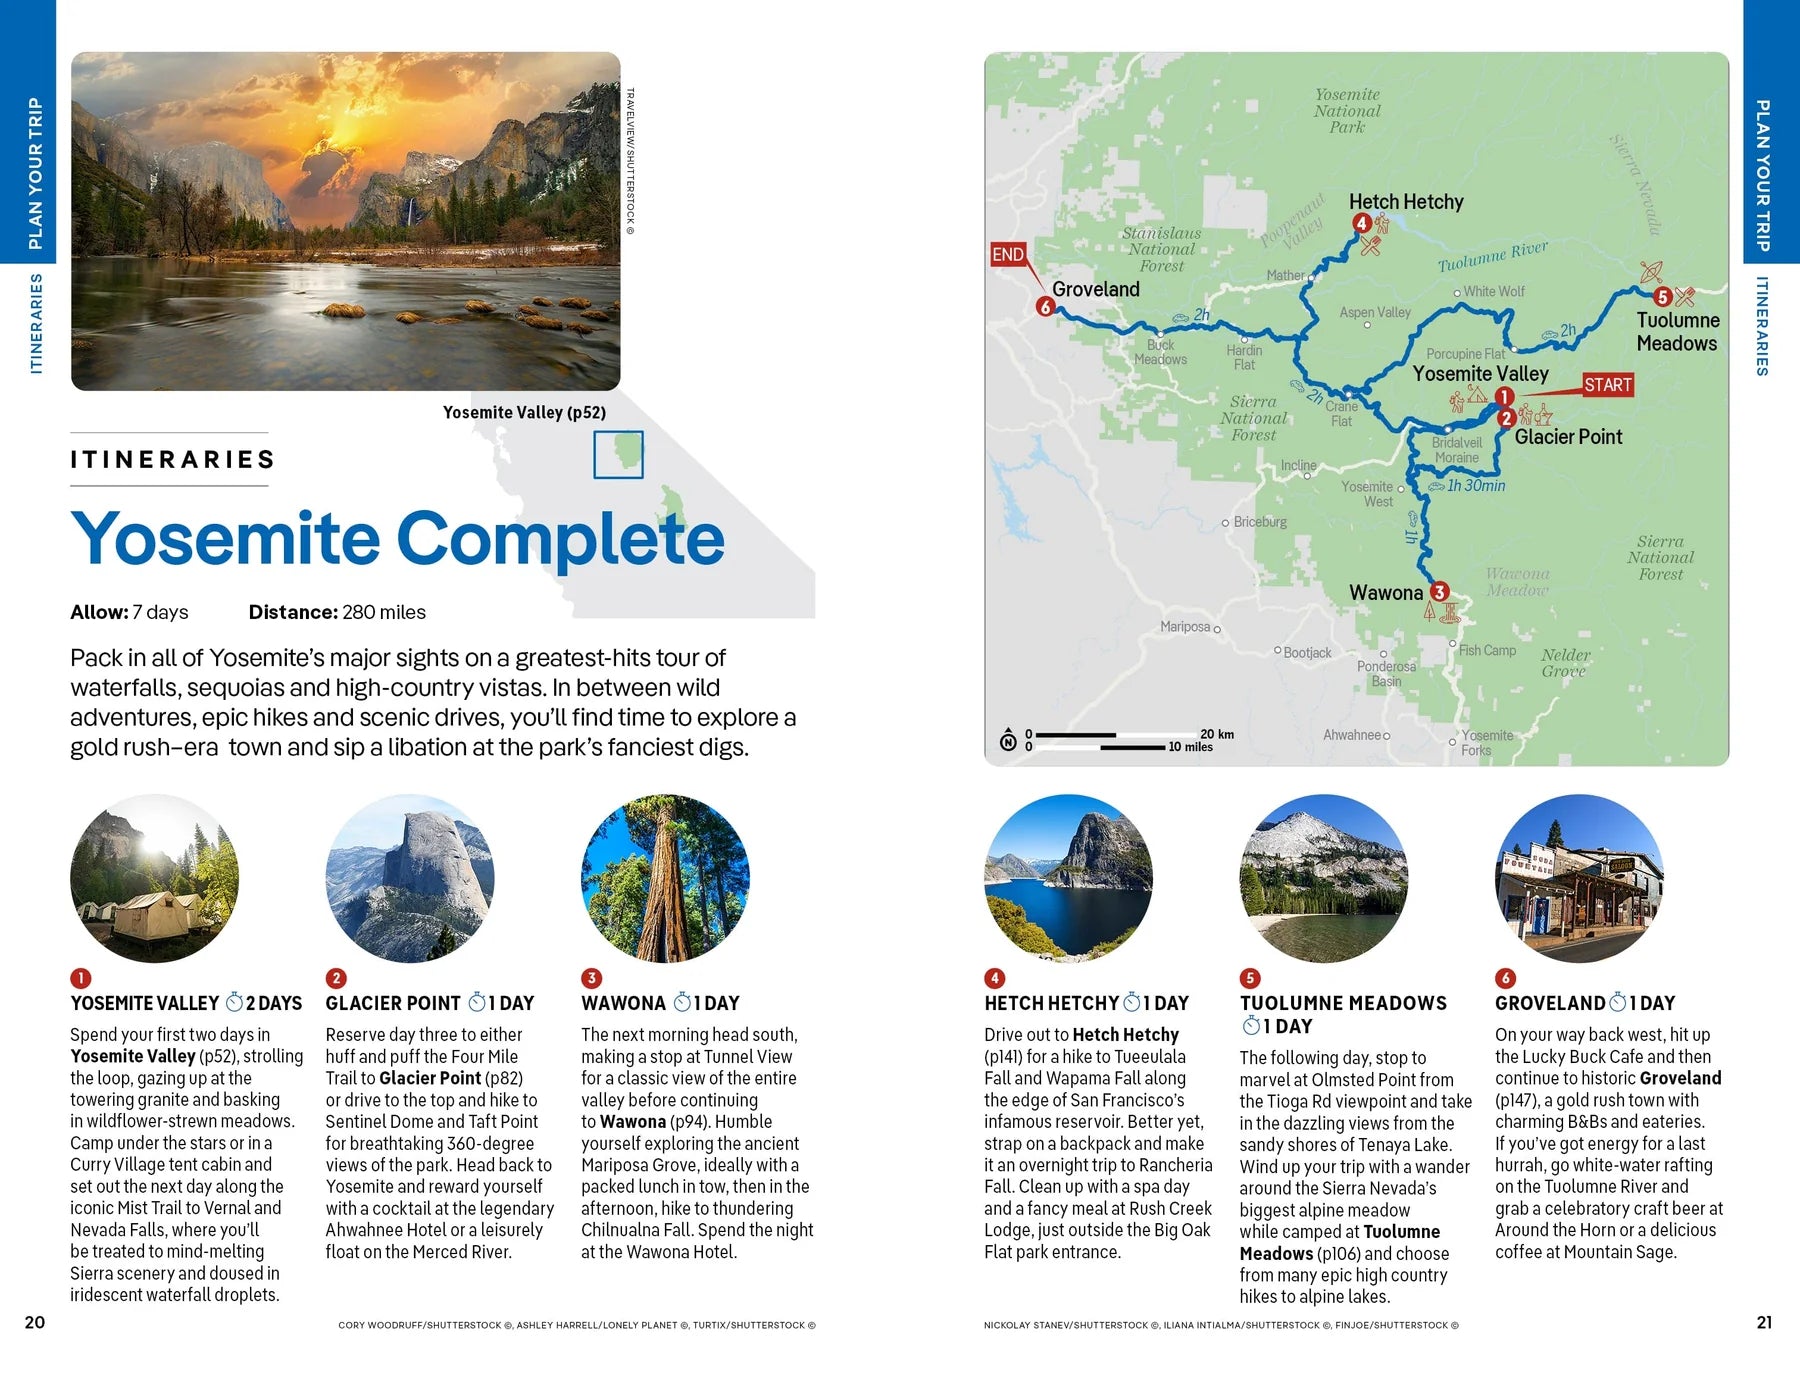 Yosemite, Sequoia and Kings Canyon National Parks - Lonely Planet